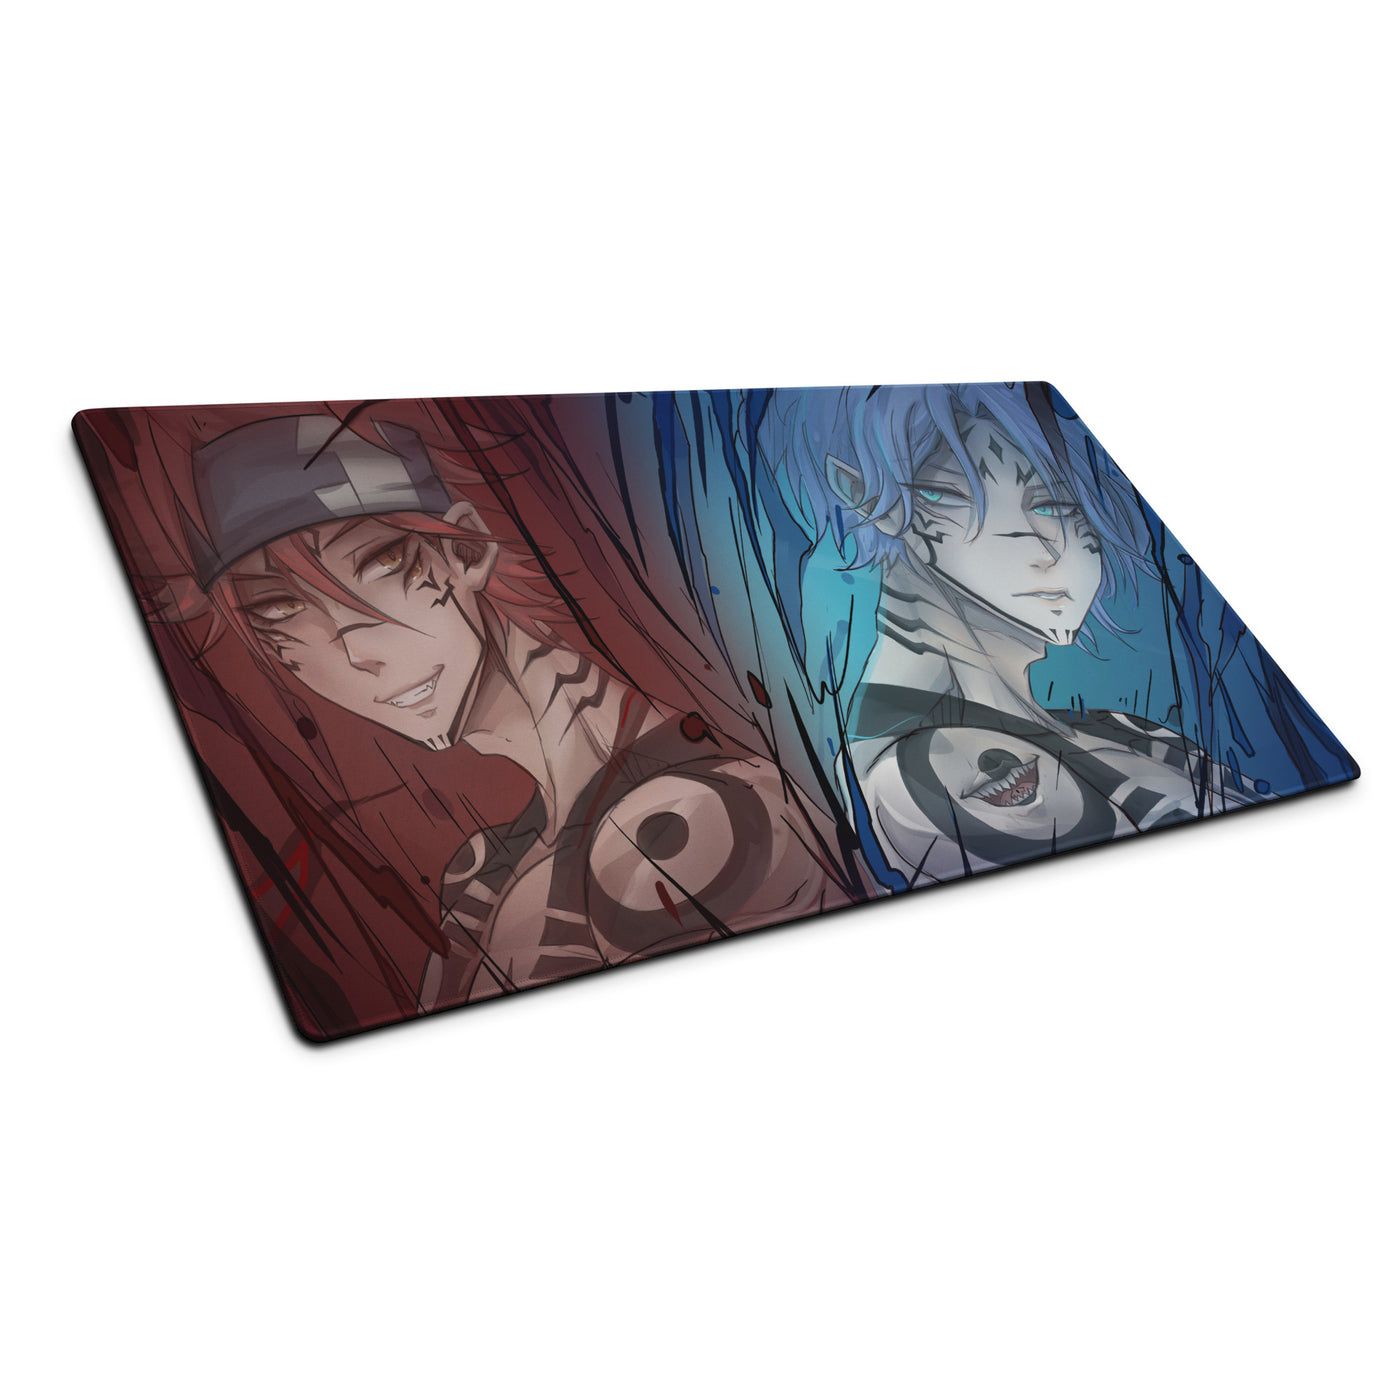 Sk8 The Infinity x Sukuna Gaming mouse pad